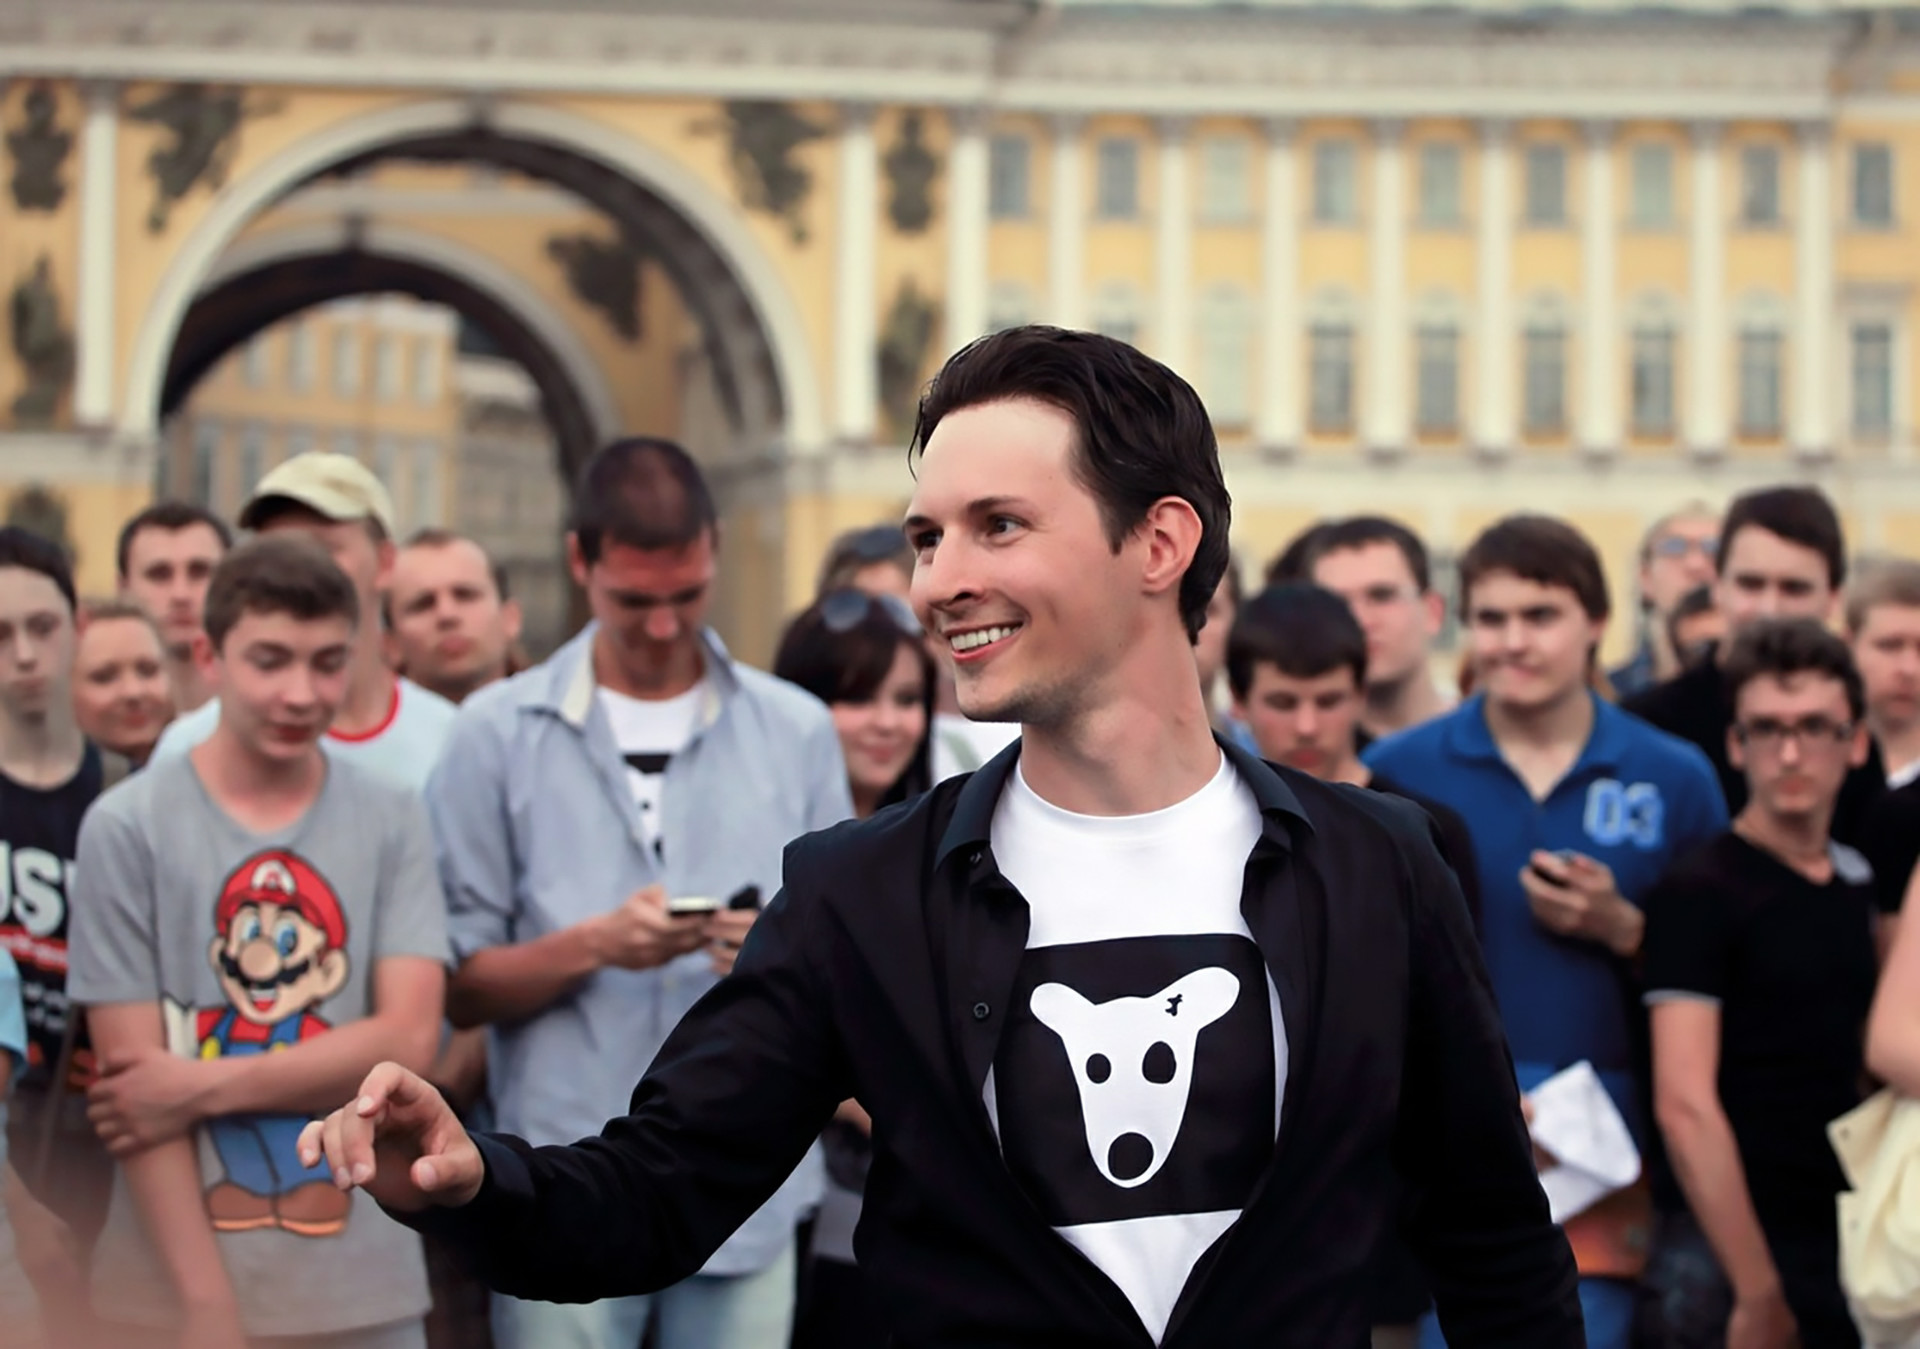 Pavel Durov, Russian entrepreneur who is best known for being the founder of the social networking site VK, and later the Telegram Messenger.